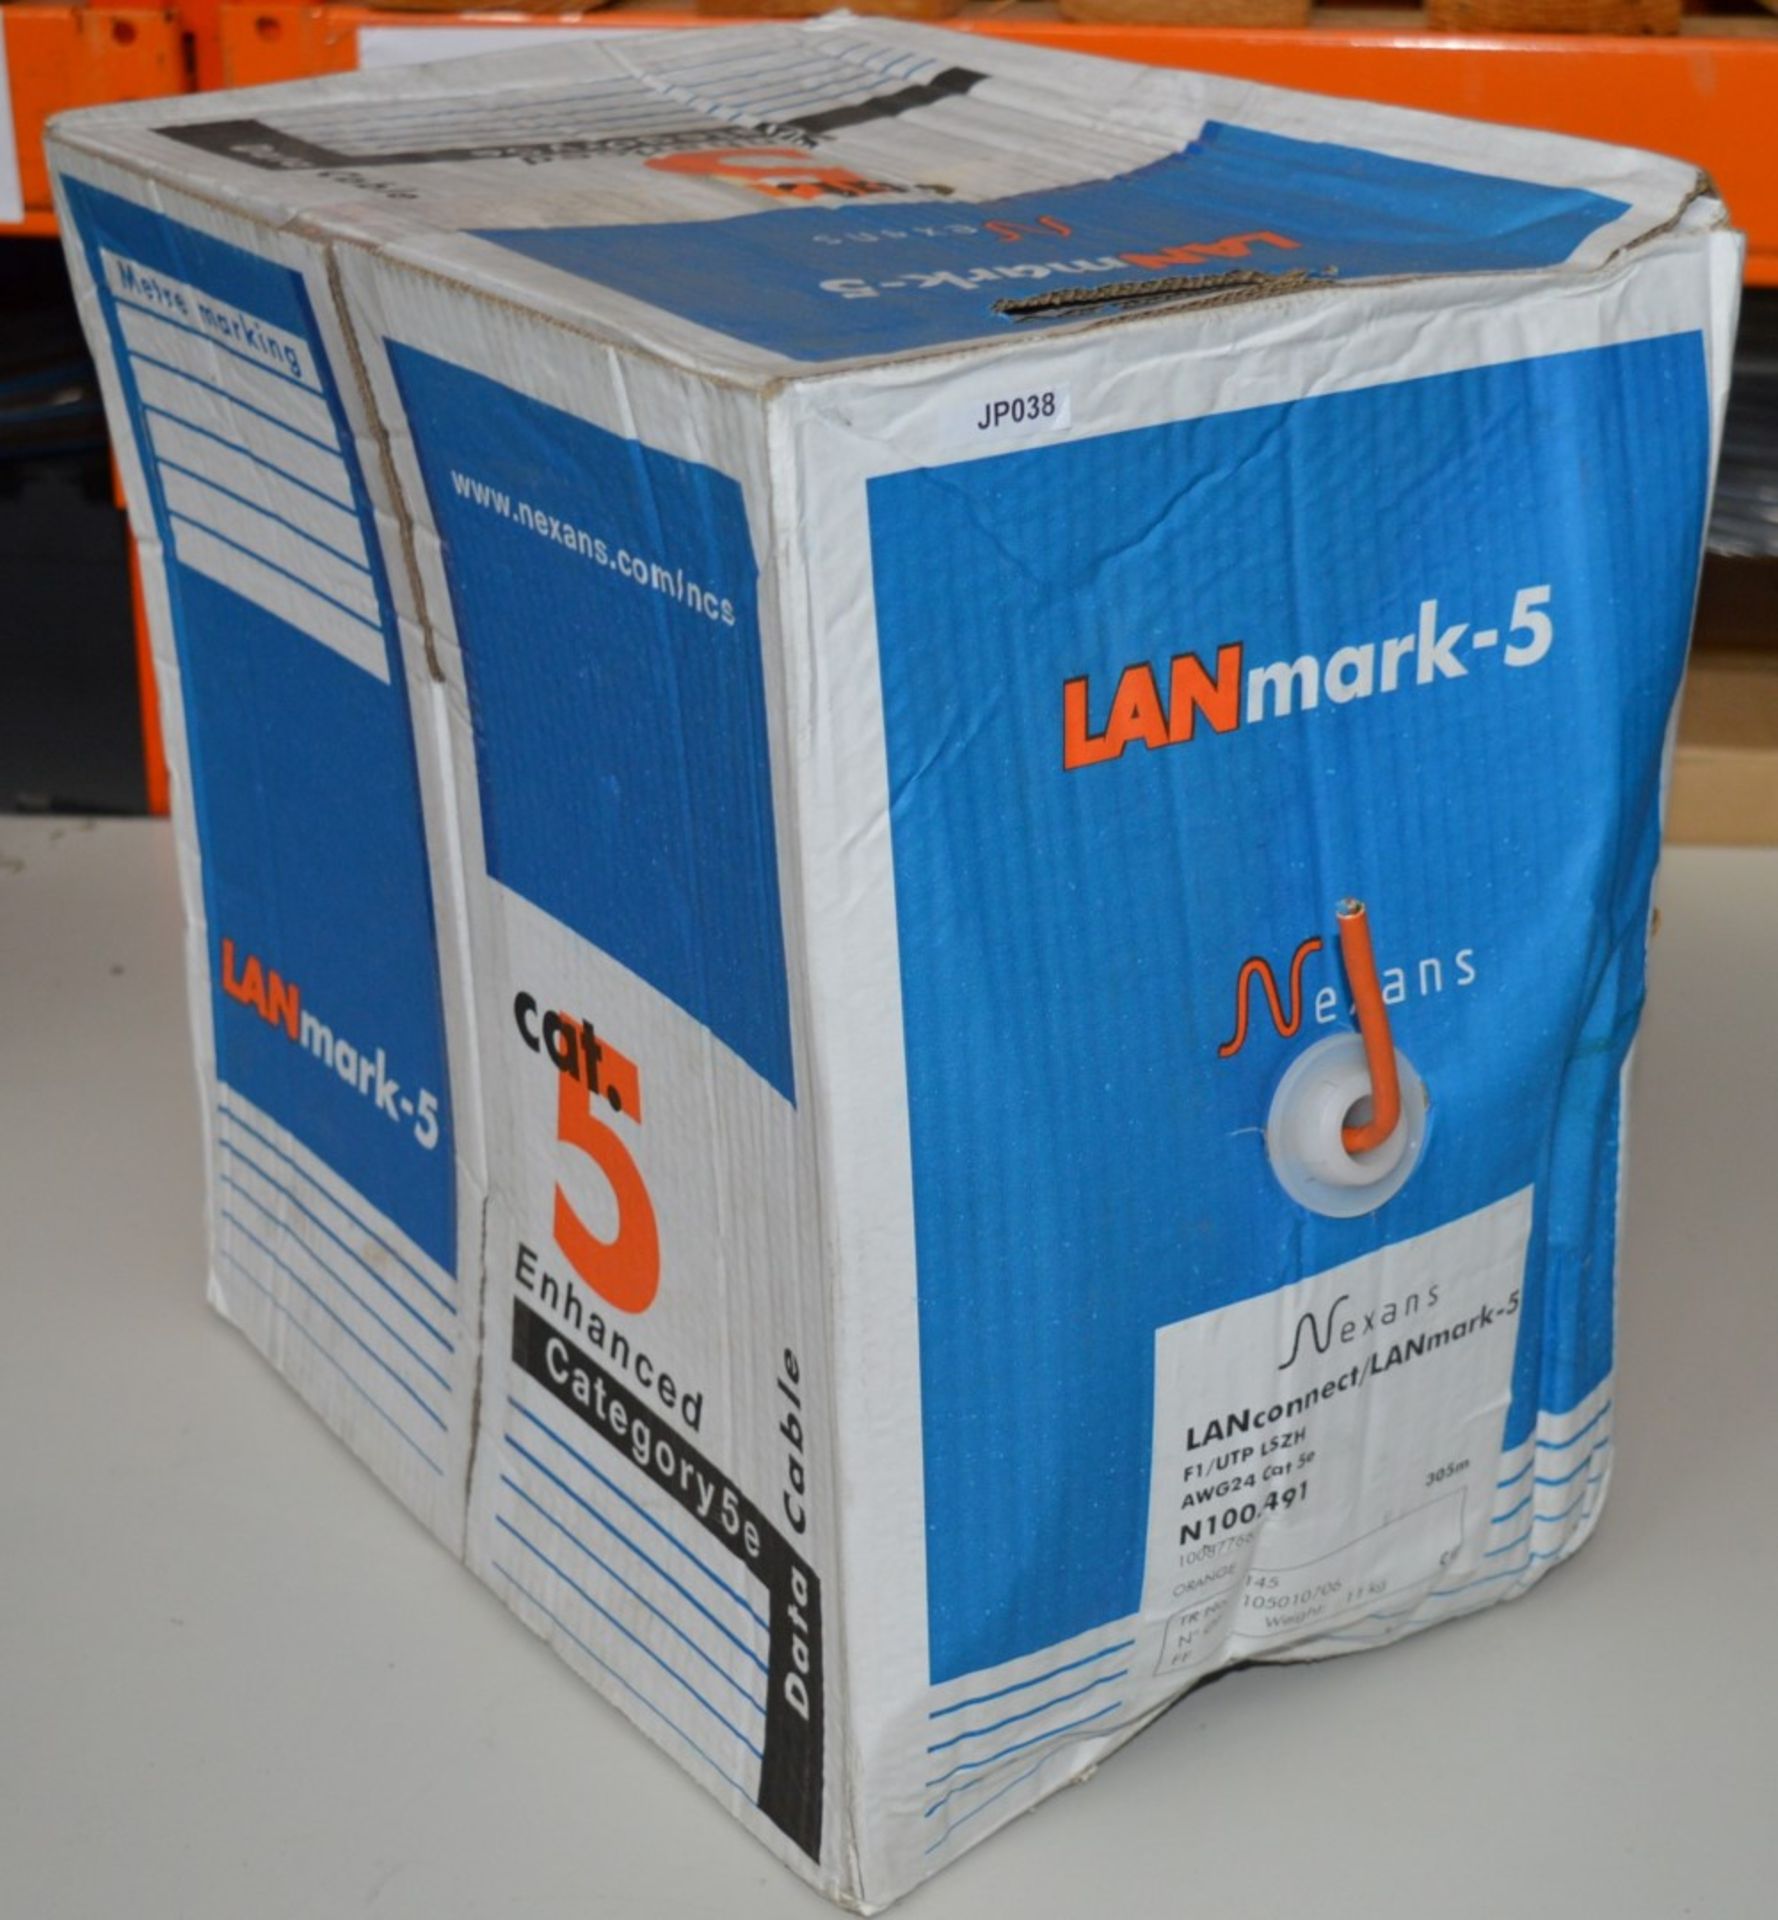 1 x Box of Nexans Lnamark5 Category 5e Cable - Part Used Box With Large Quantity Included - Box Size - Image 3 of 4